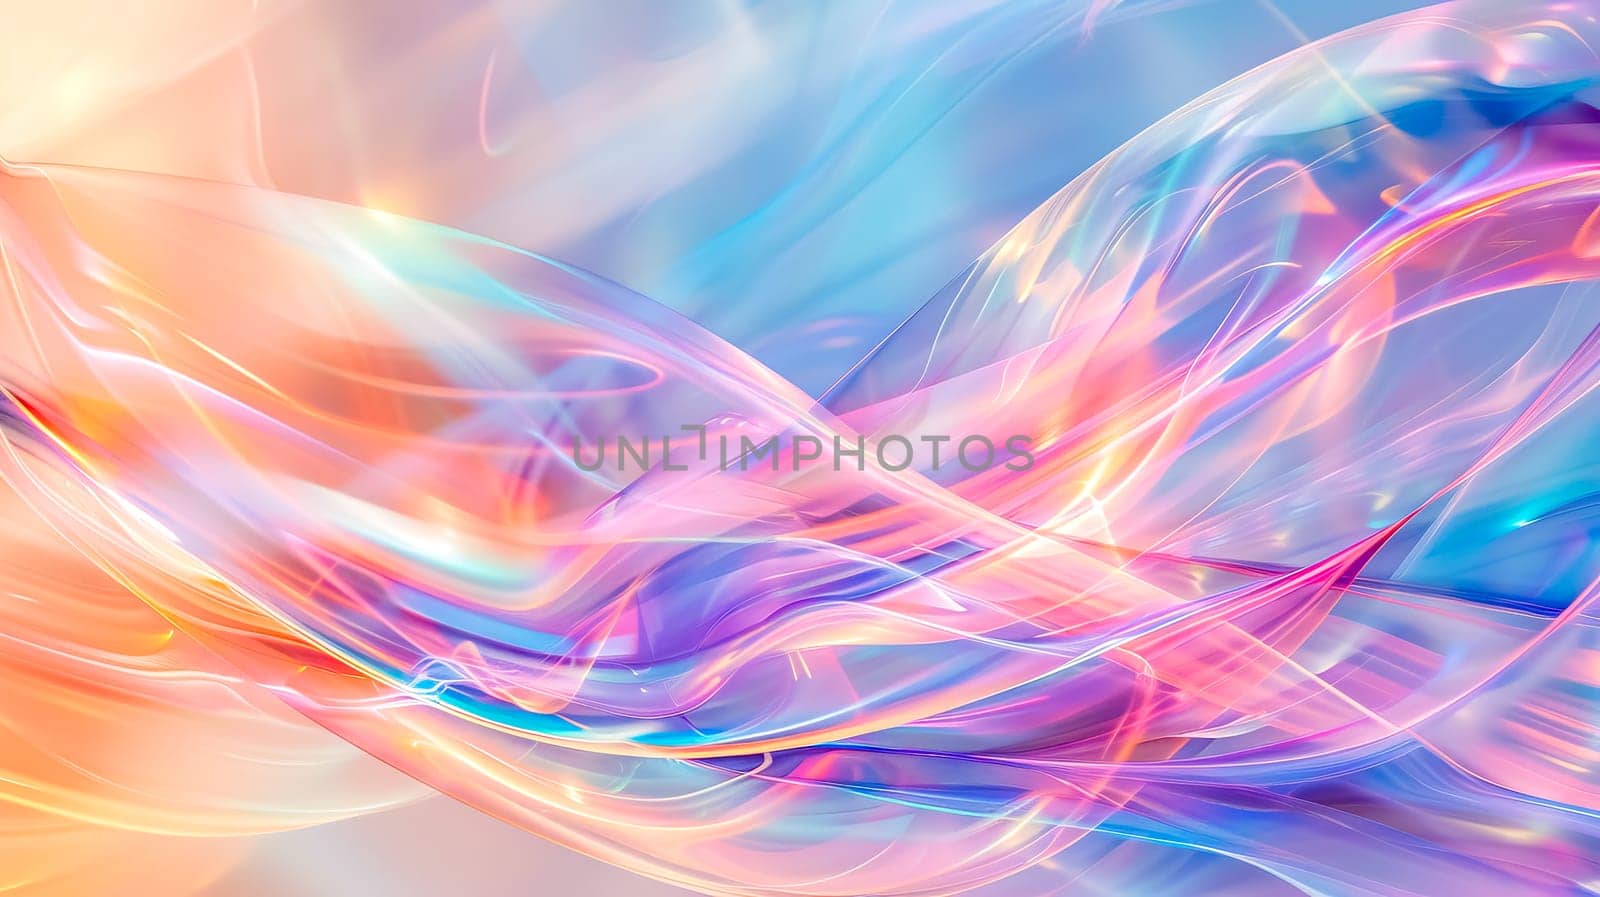 Vibrant abstract background with swirling pastel hues and dynamic motion by Edophoto